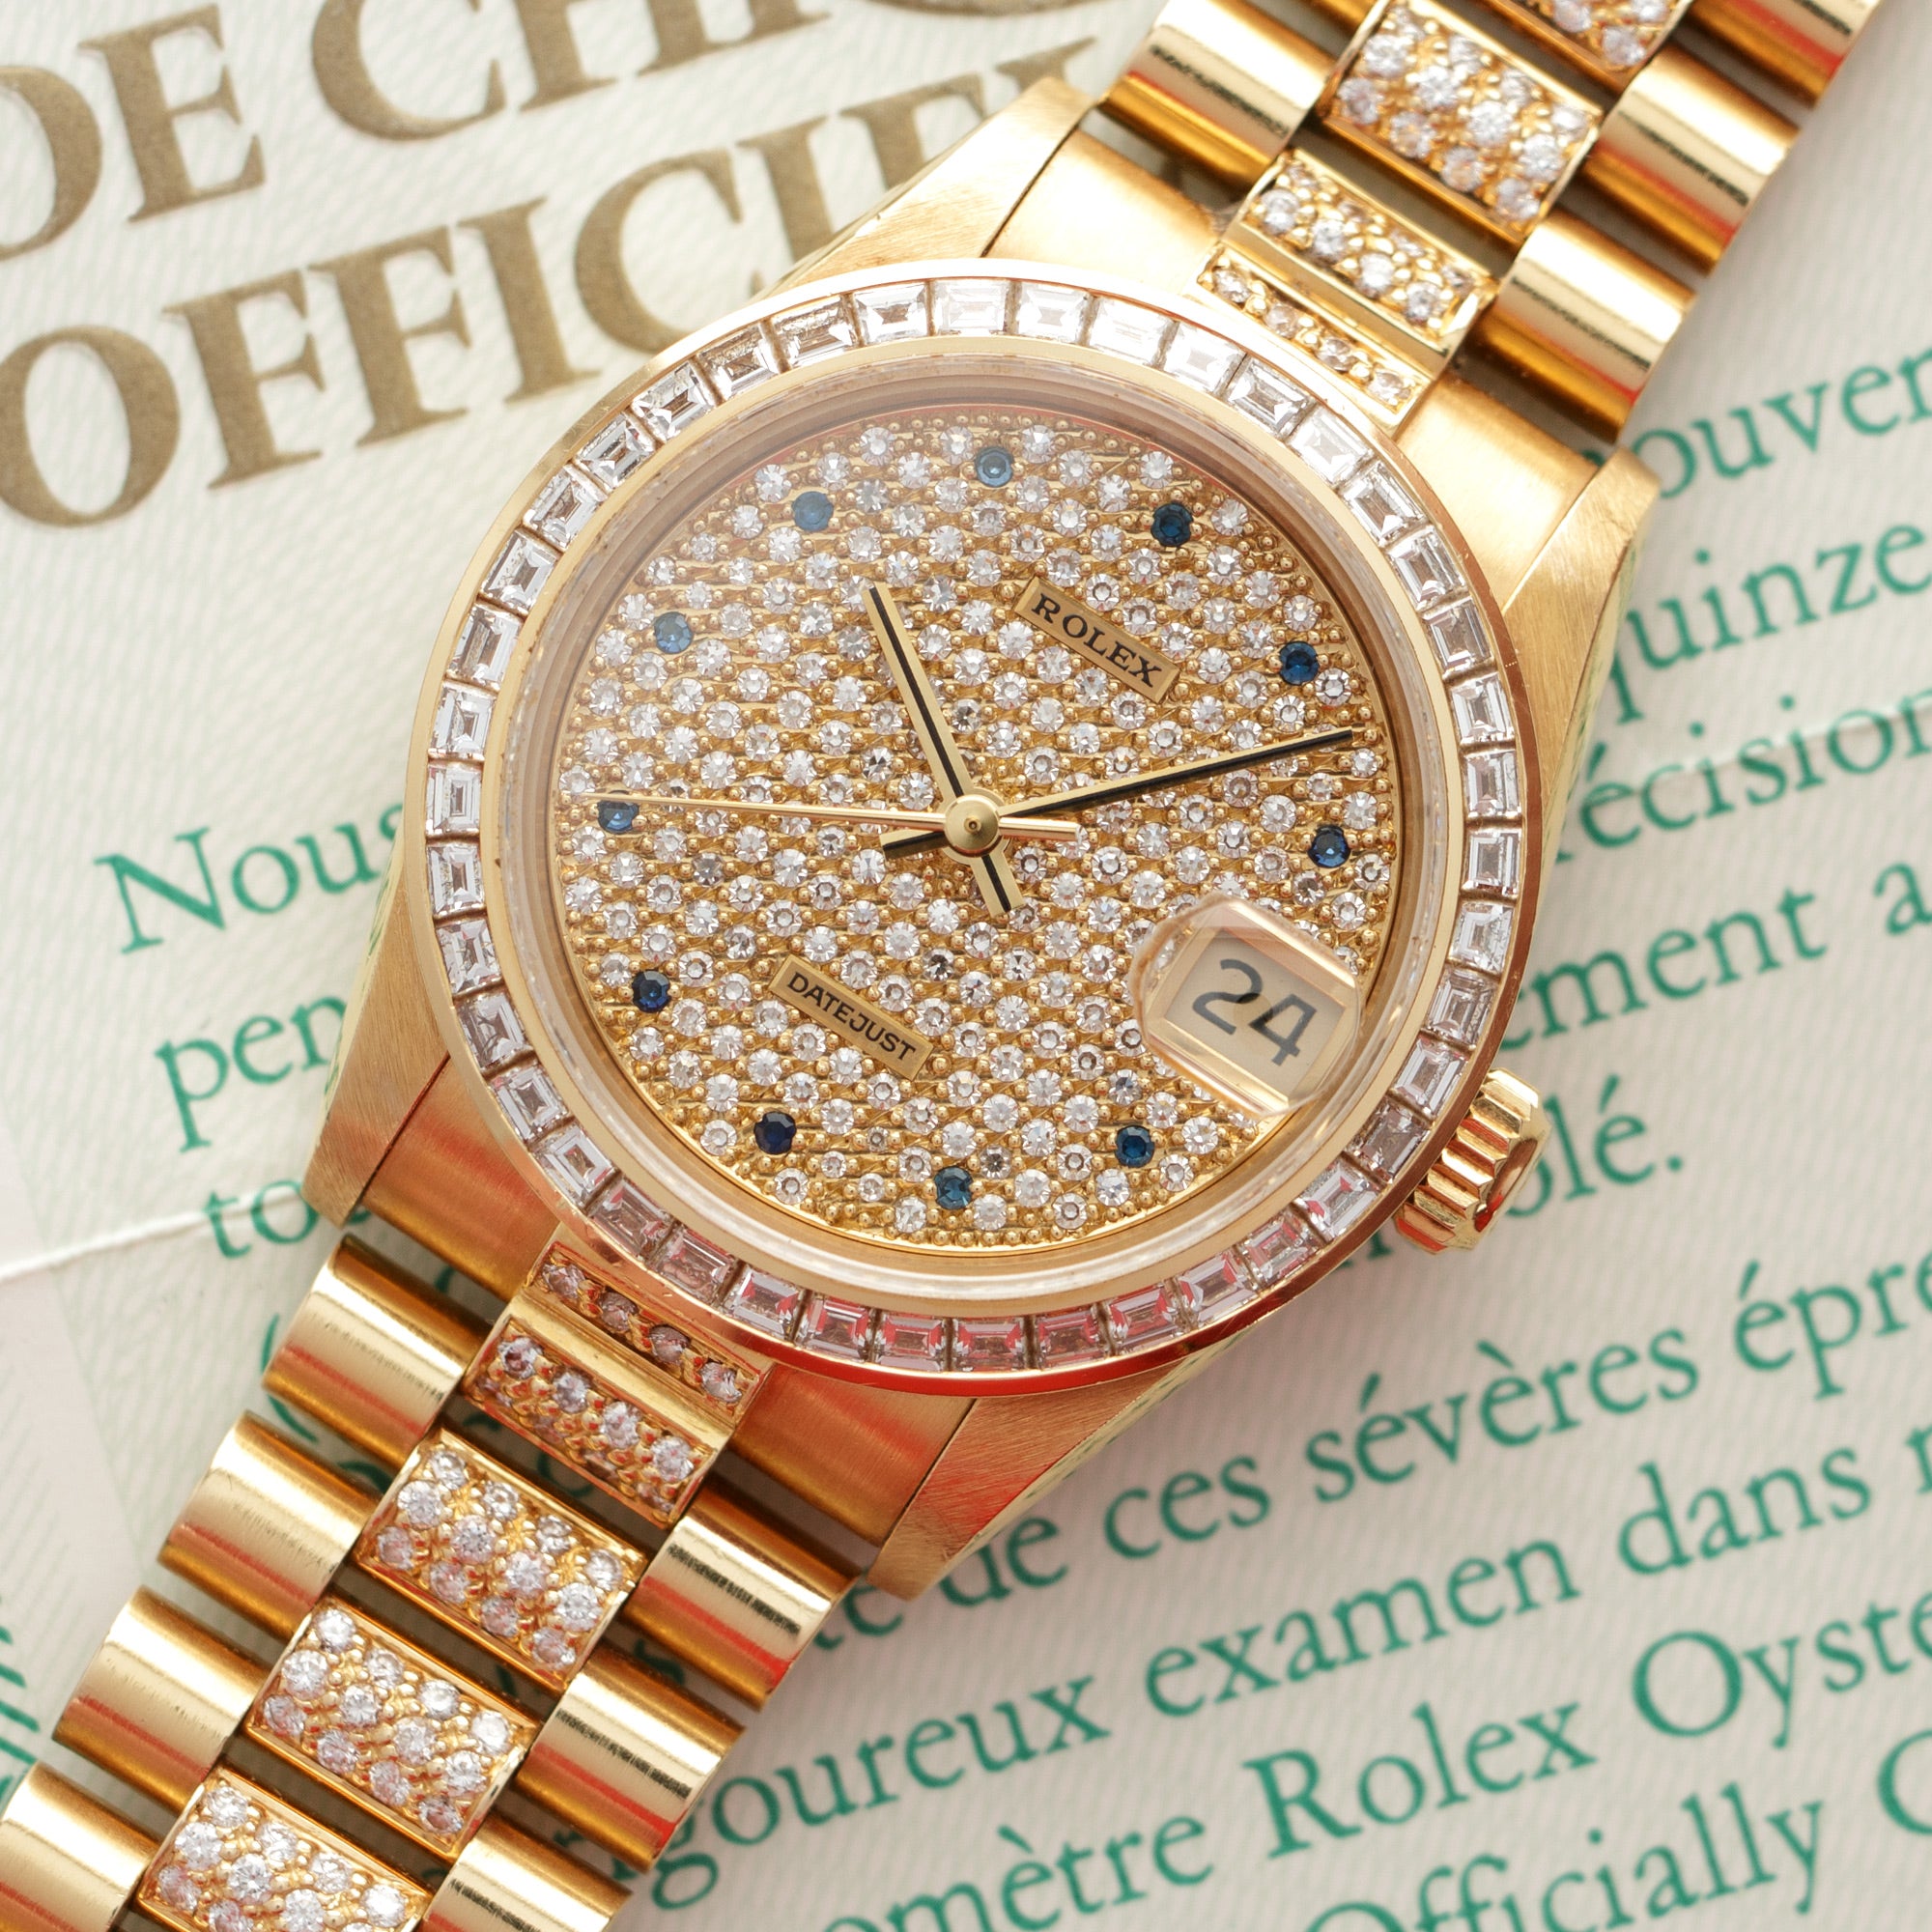 Rolex - Rolex Datejust Ref. 68058 with Pave Diamond and Sapphire Dial - The Keystone Watches